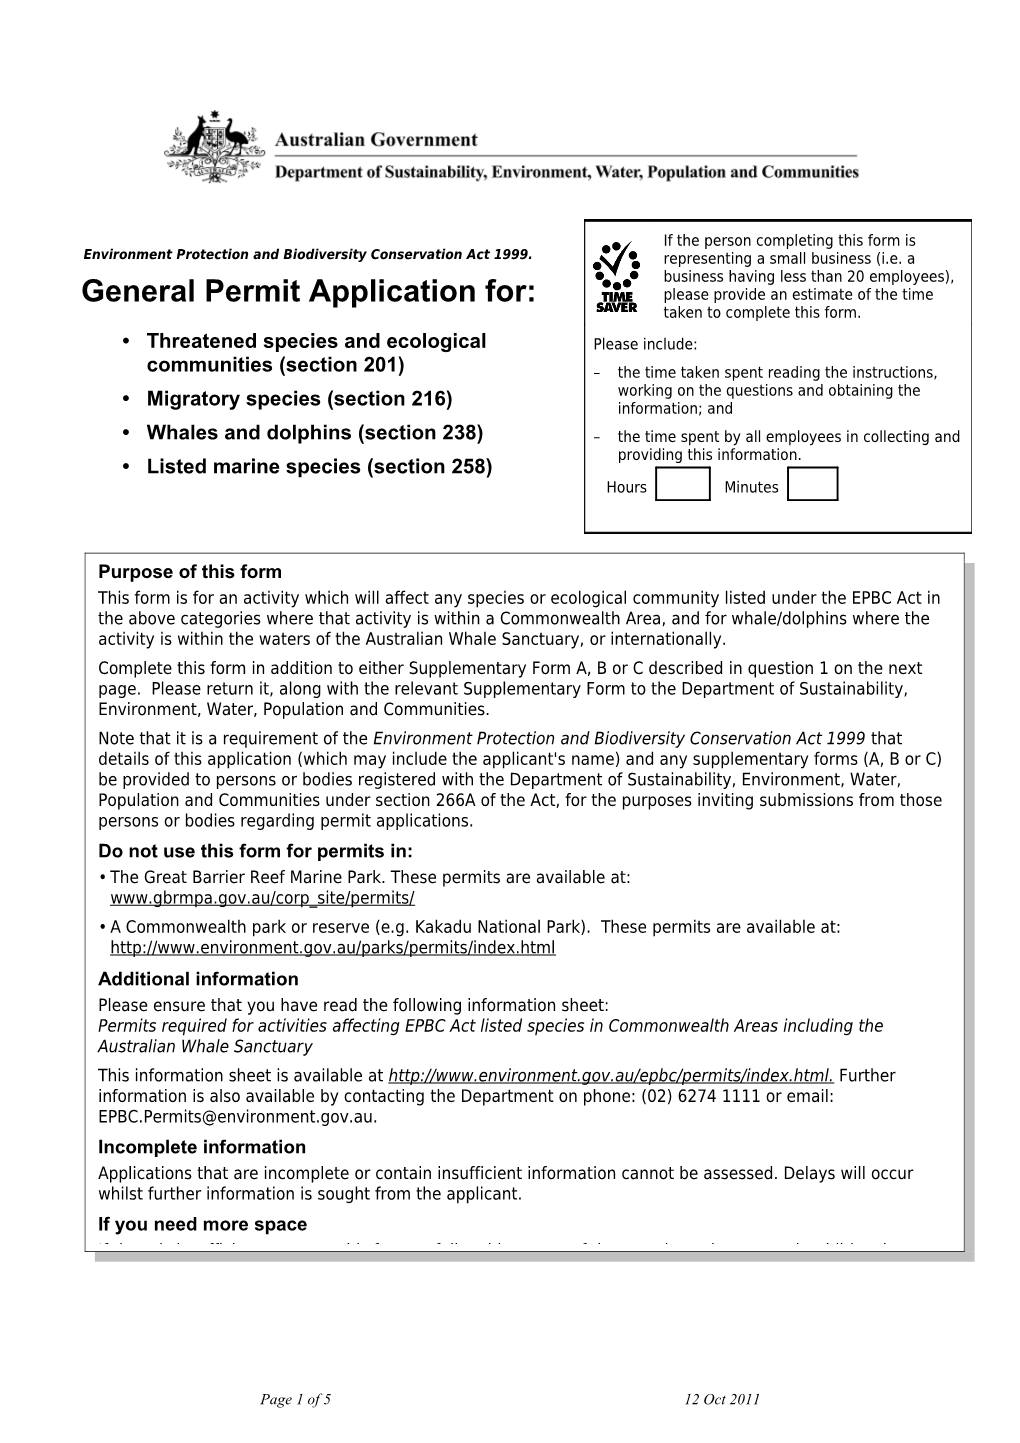 General Permit Application Form for Interaction with a Protected Species Under the EPBC Act